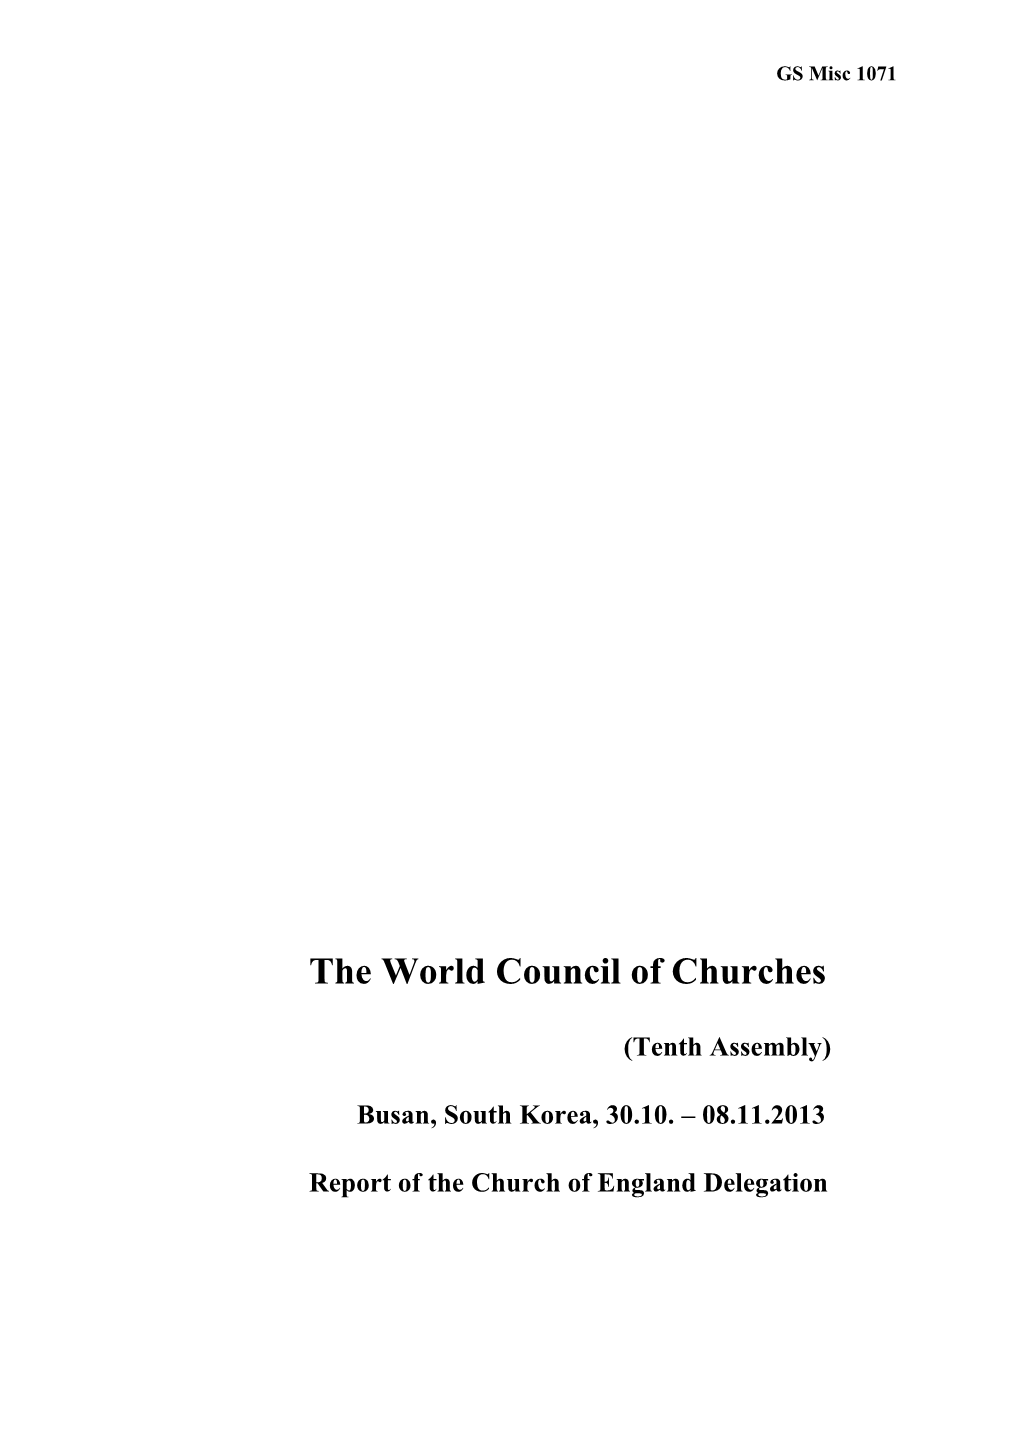 The World Council of Churches